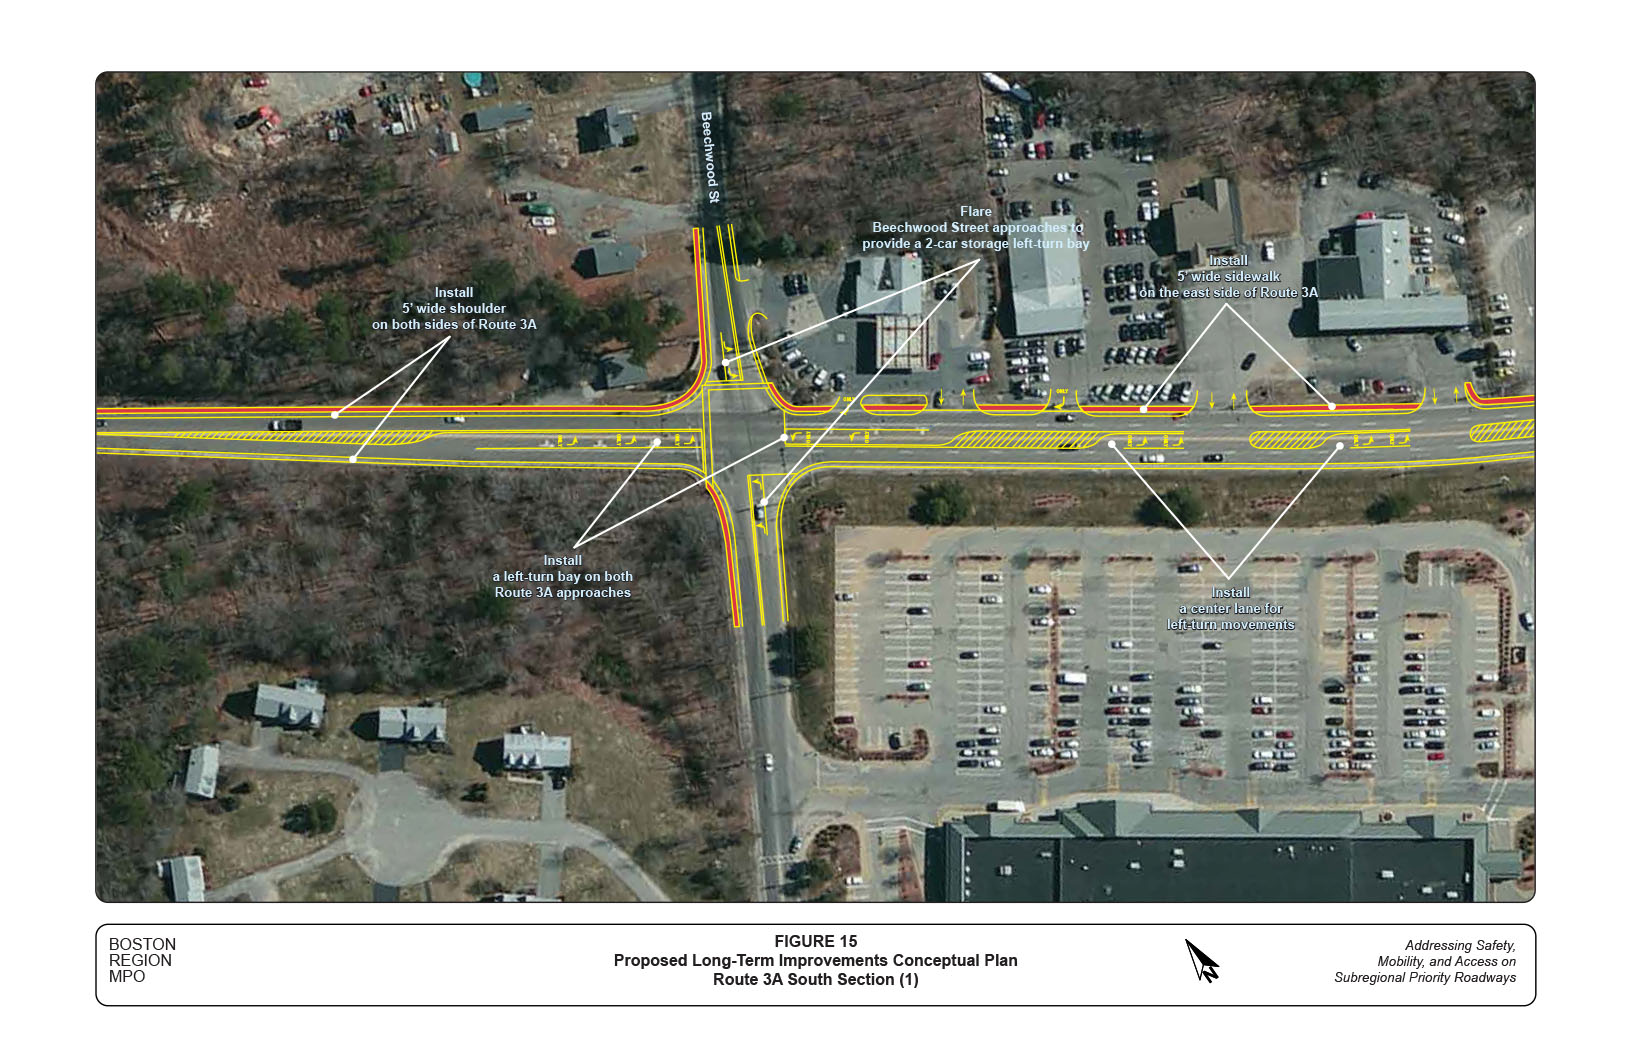 Figure 15 is an aerial view map that depicts the proposed long-term improvements (conceptual plan) for the south section of Route 3A.